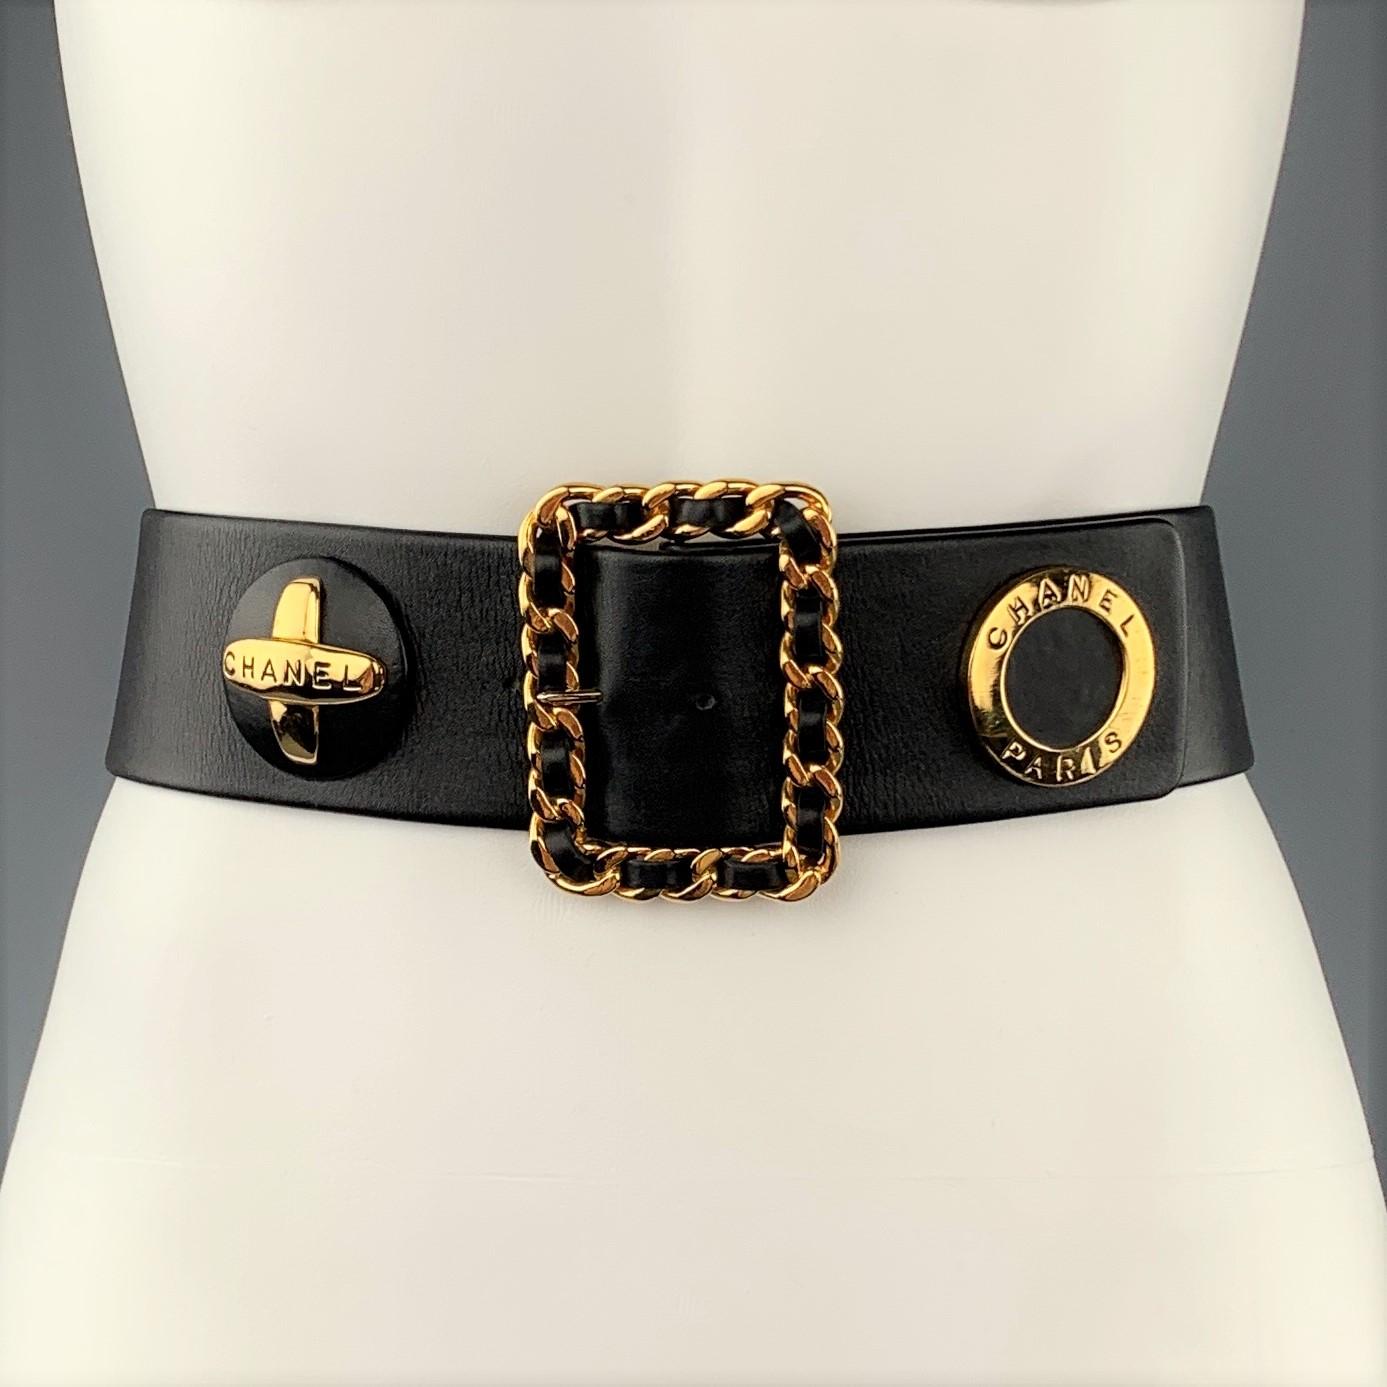 Vintage CHANEL circa Fall Winter 1993 Collection waist belt features a thick black leather strap adorned with oversized gold tone ornament studs and a woven chain buckle.  Made in France.
 
Excellent Pre-Owned Condition.
Marked: 70/28  93 A
